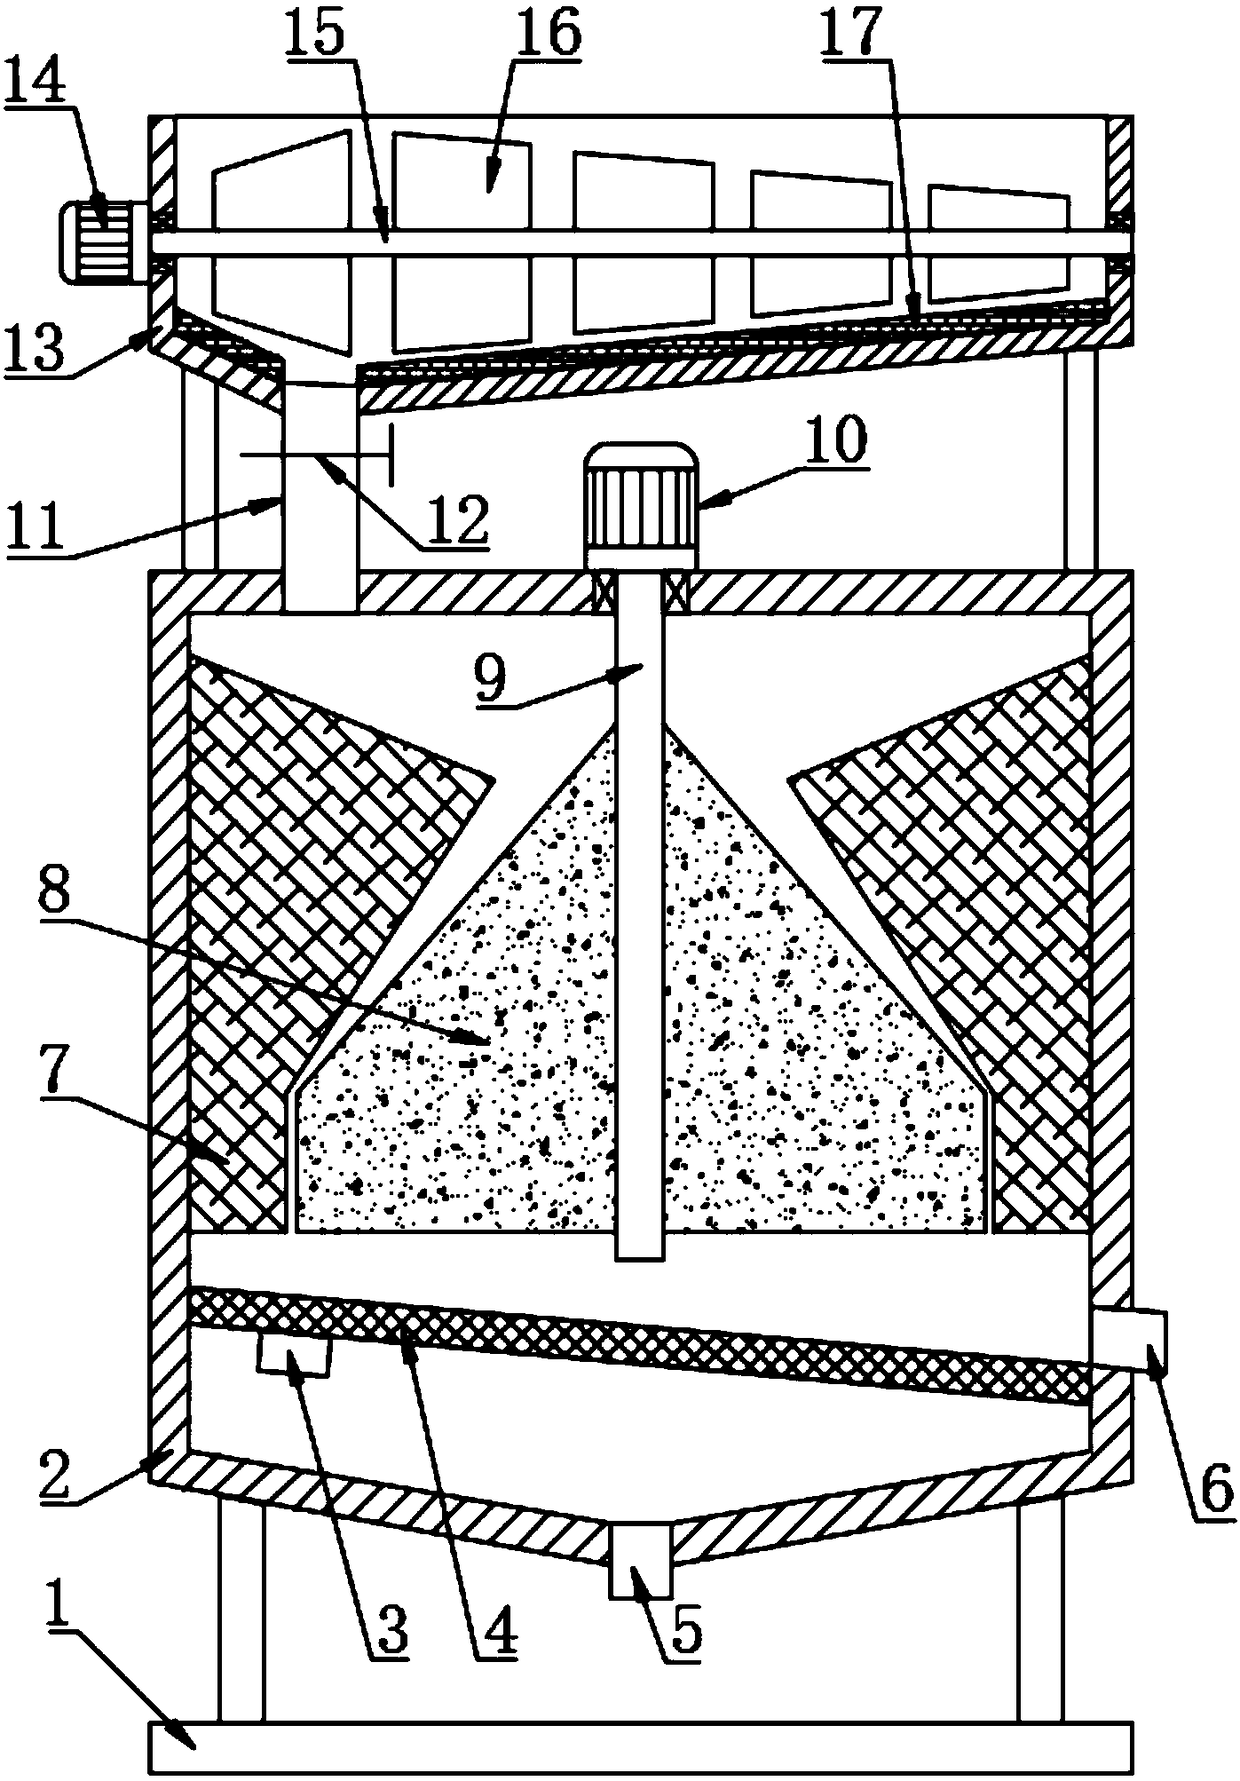 Drying and grinding device for agricultural soil testing